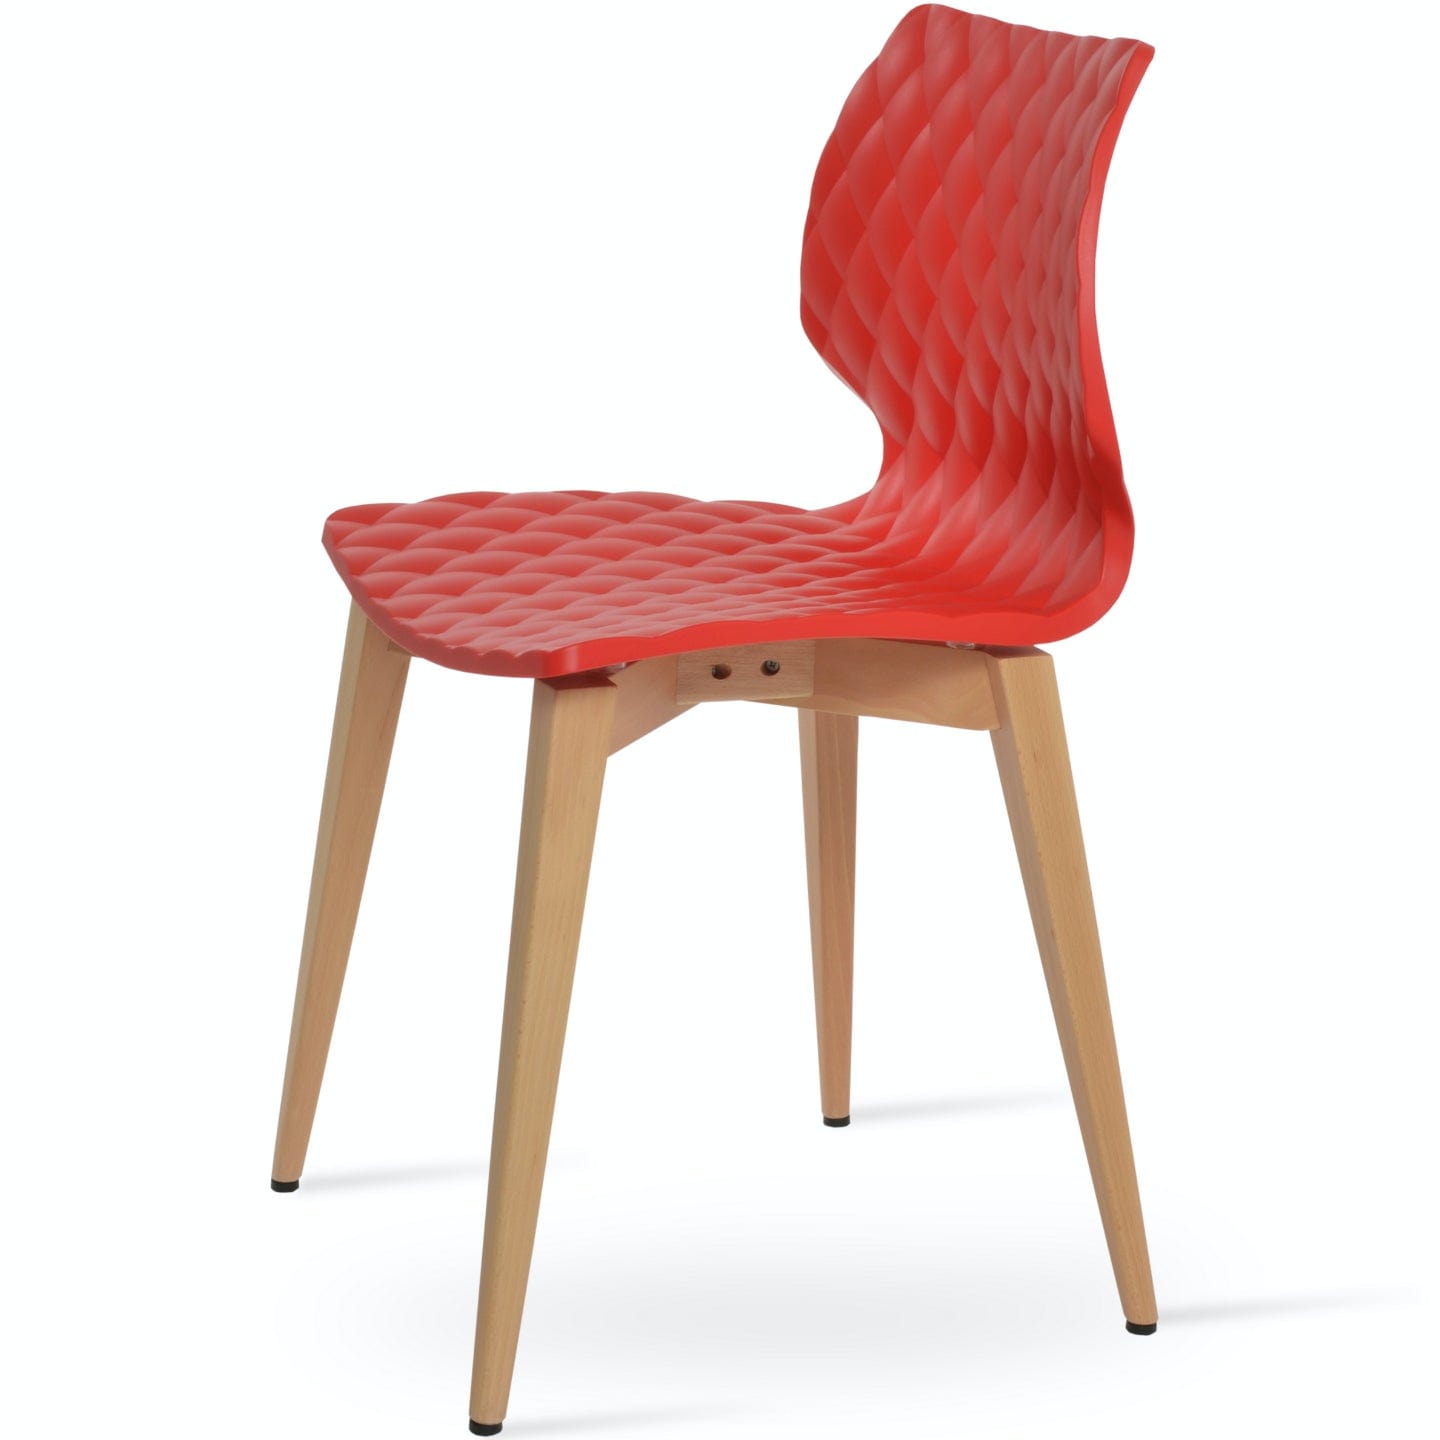 Soho Concept uni-562-industrial-natural-wood-base-polypropylene-seat-dining-chair-in-red